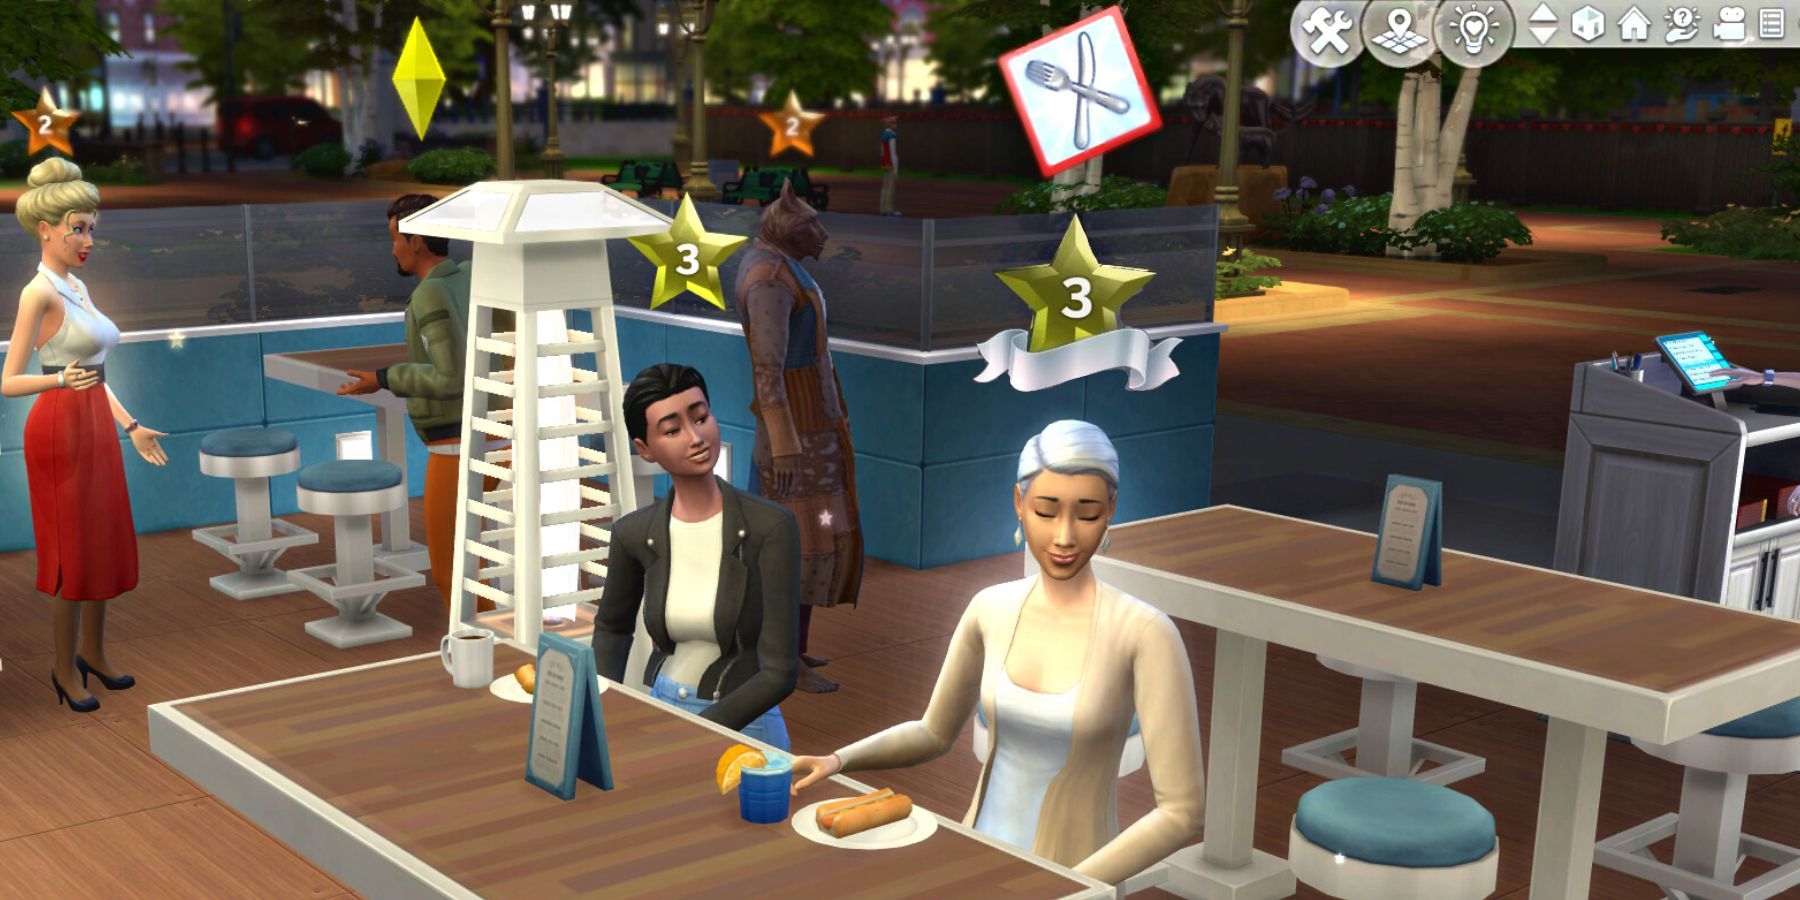 The Sims 4 - Dine Out